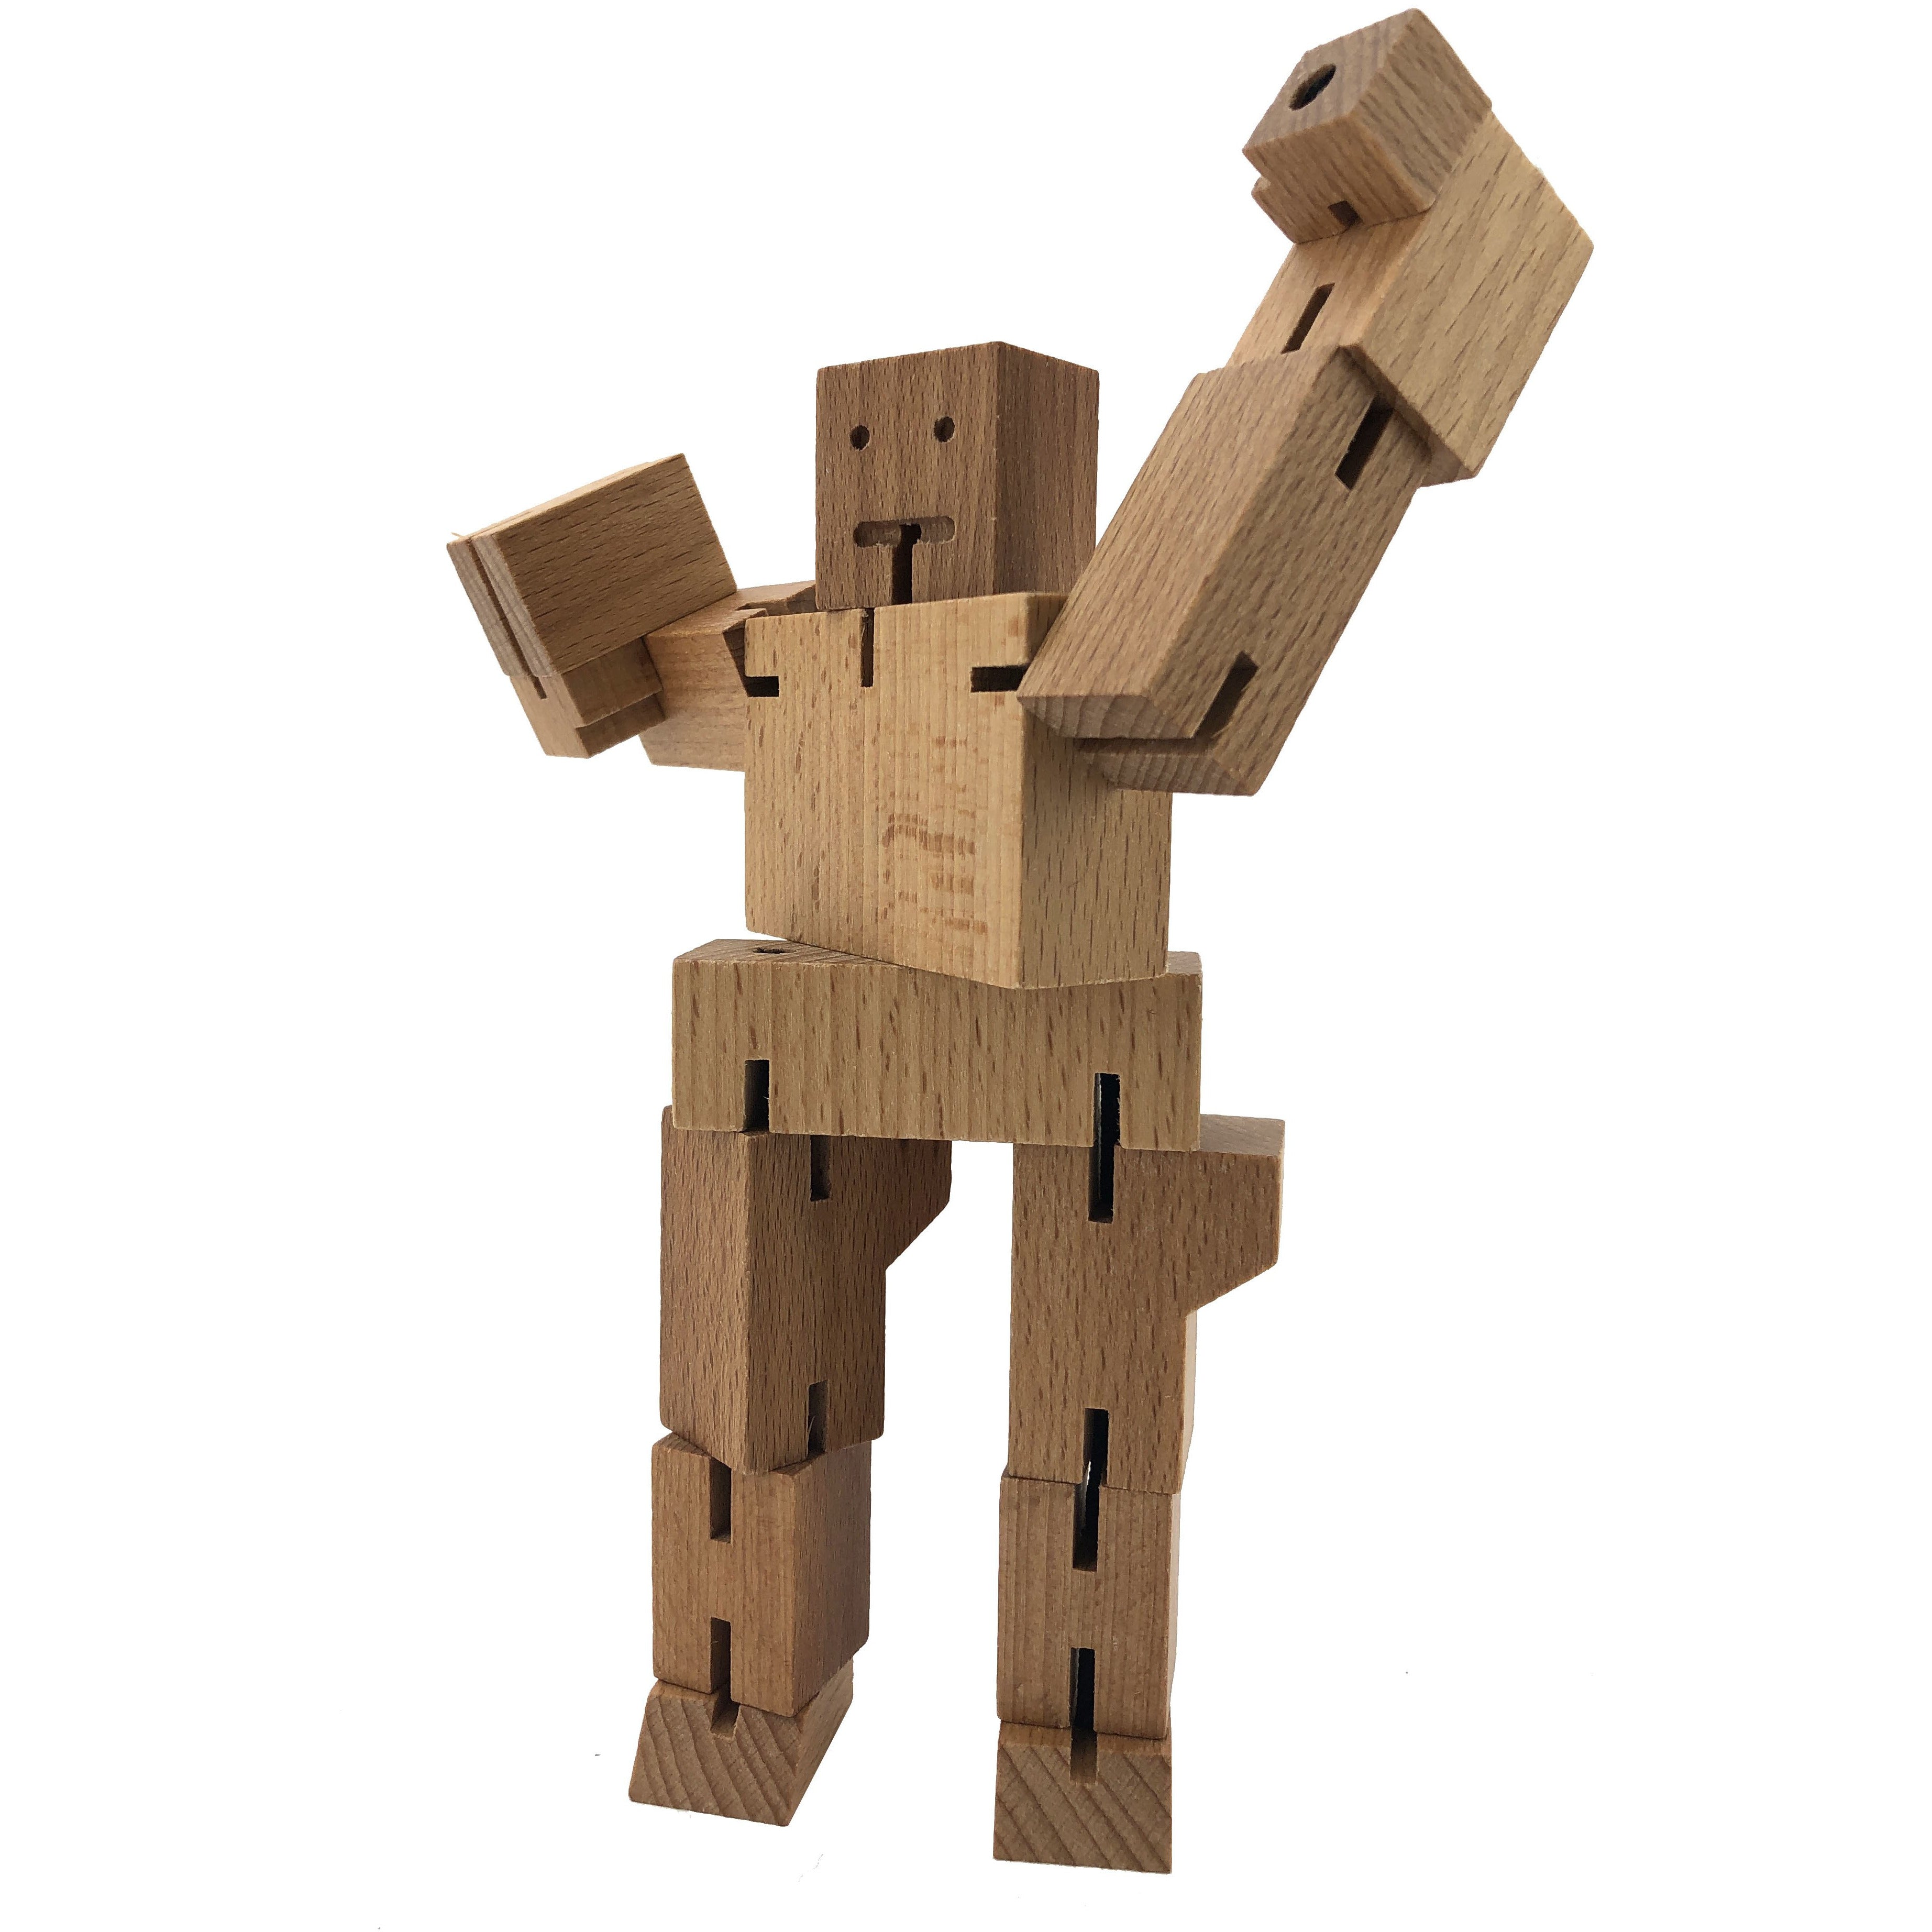 Areaware Micro Cubebot / Wooden Toy Puzzle / Natural Wood / Minature / Desk Toy